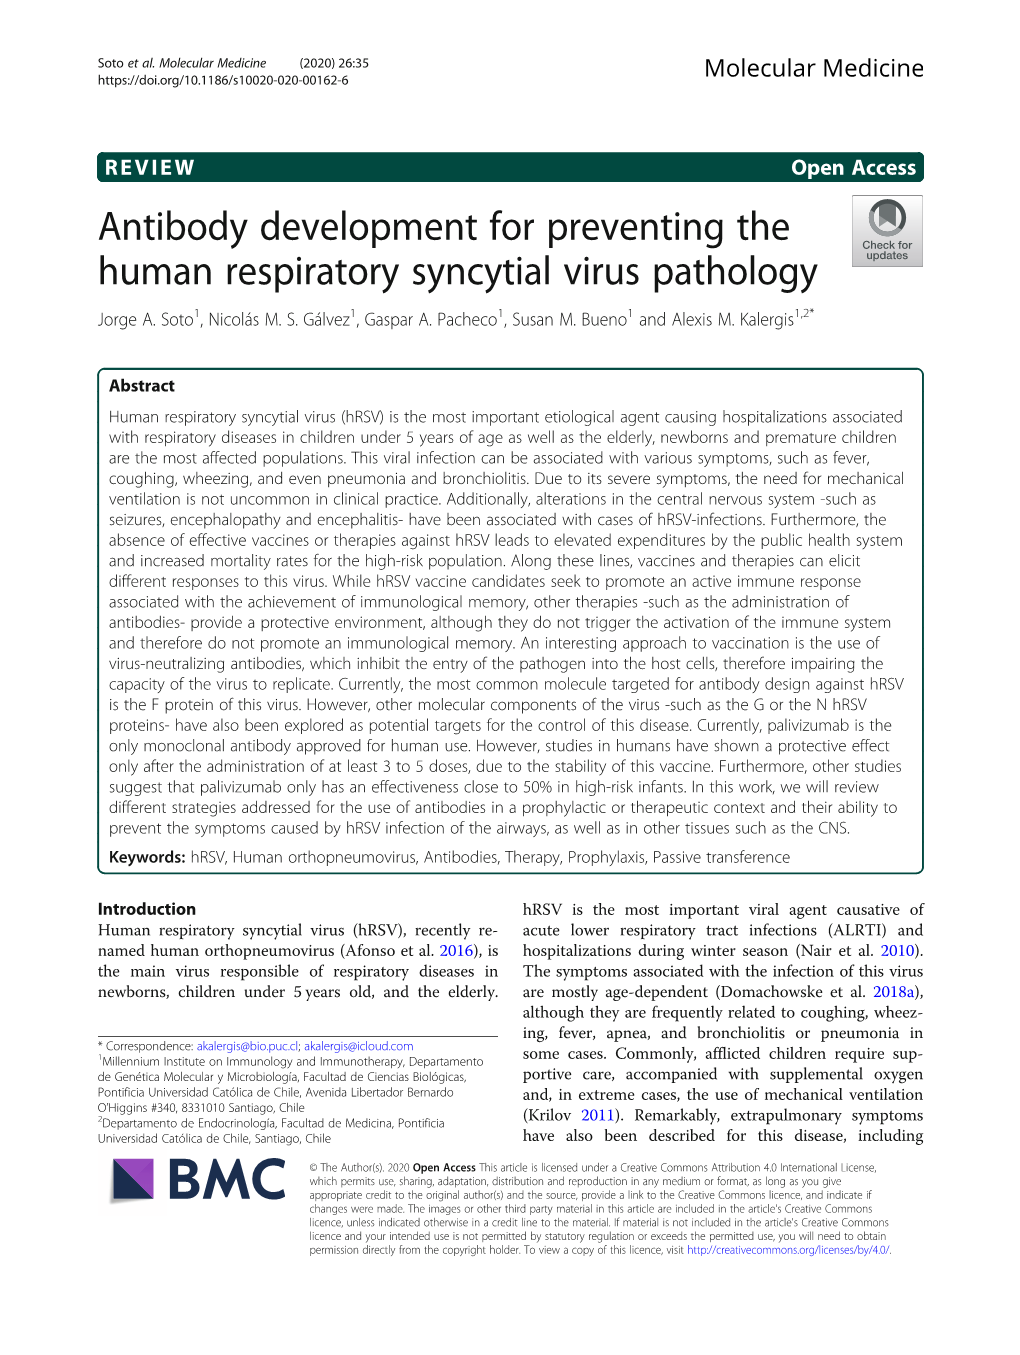 Antibody Development for Preventing the Human Respiratory Syncytial Virus Pathology Jorge A